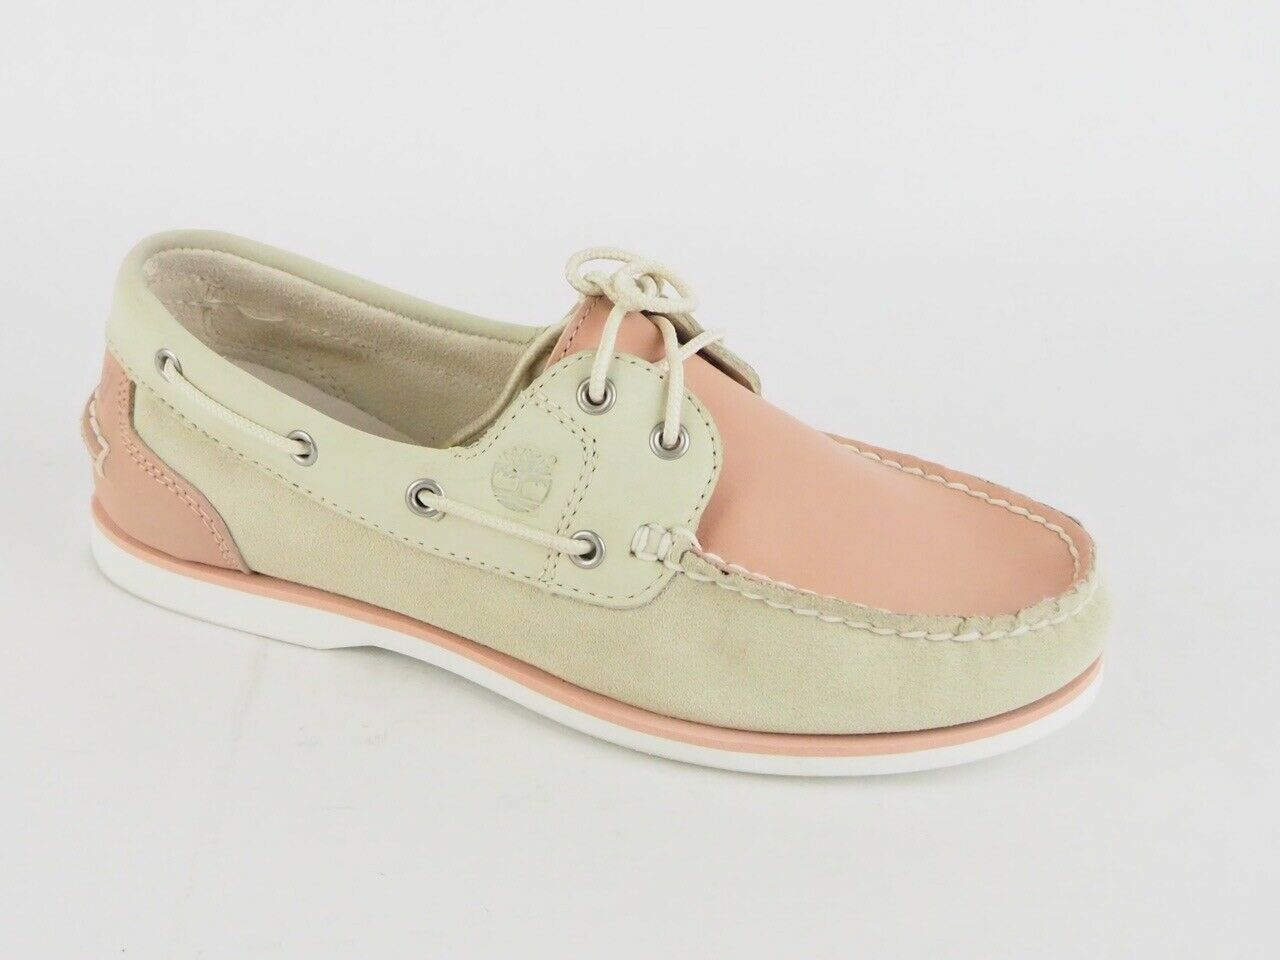 Womens Timberland Classic 2 Eye Boat 8146A Beige / Pink Leather Boat Shoes - London Top Style